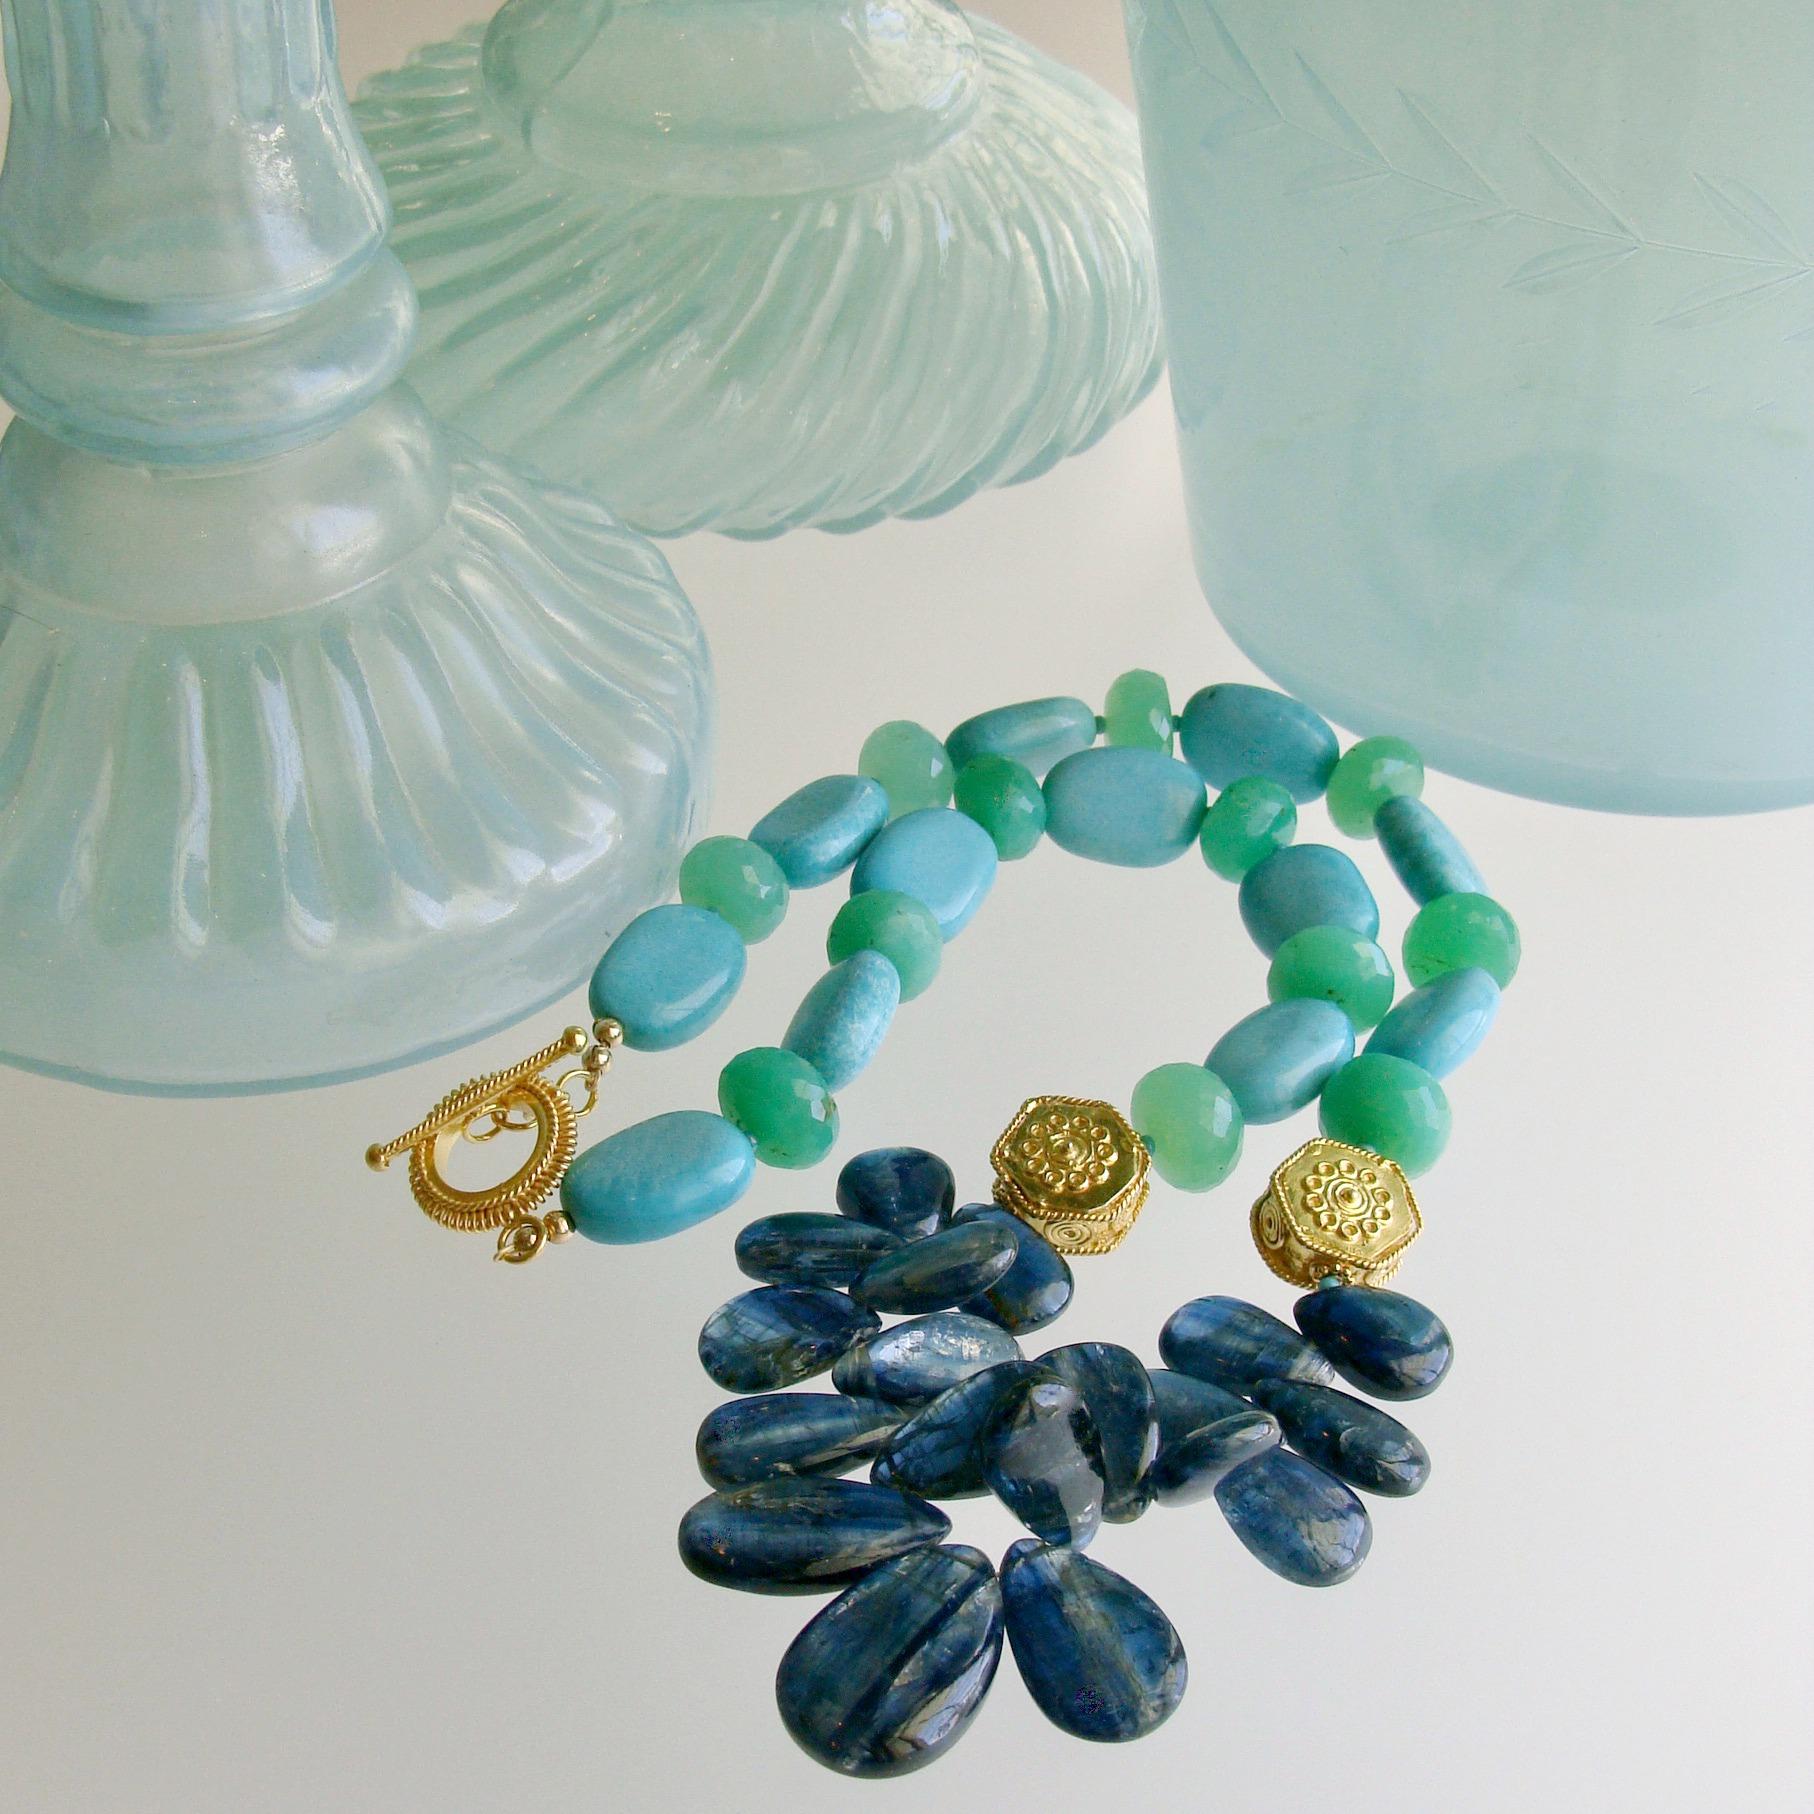 Artisan Kyanite Turquoise and Chrysoprase Statement Necklace, Lala II Necklace